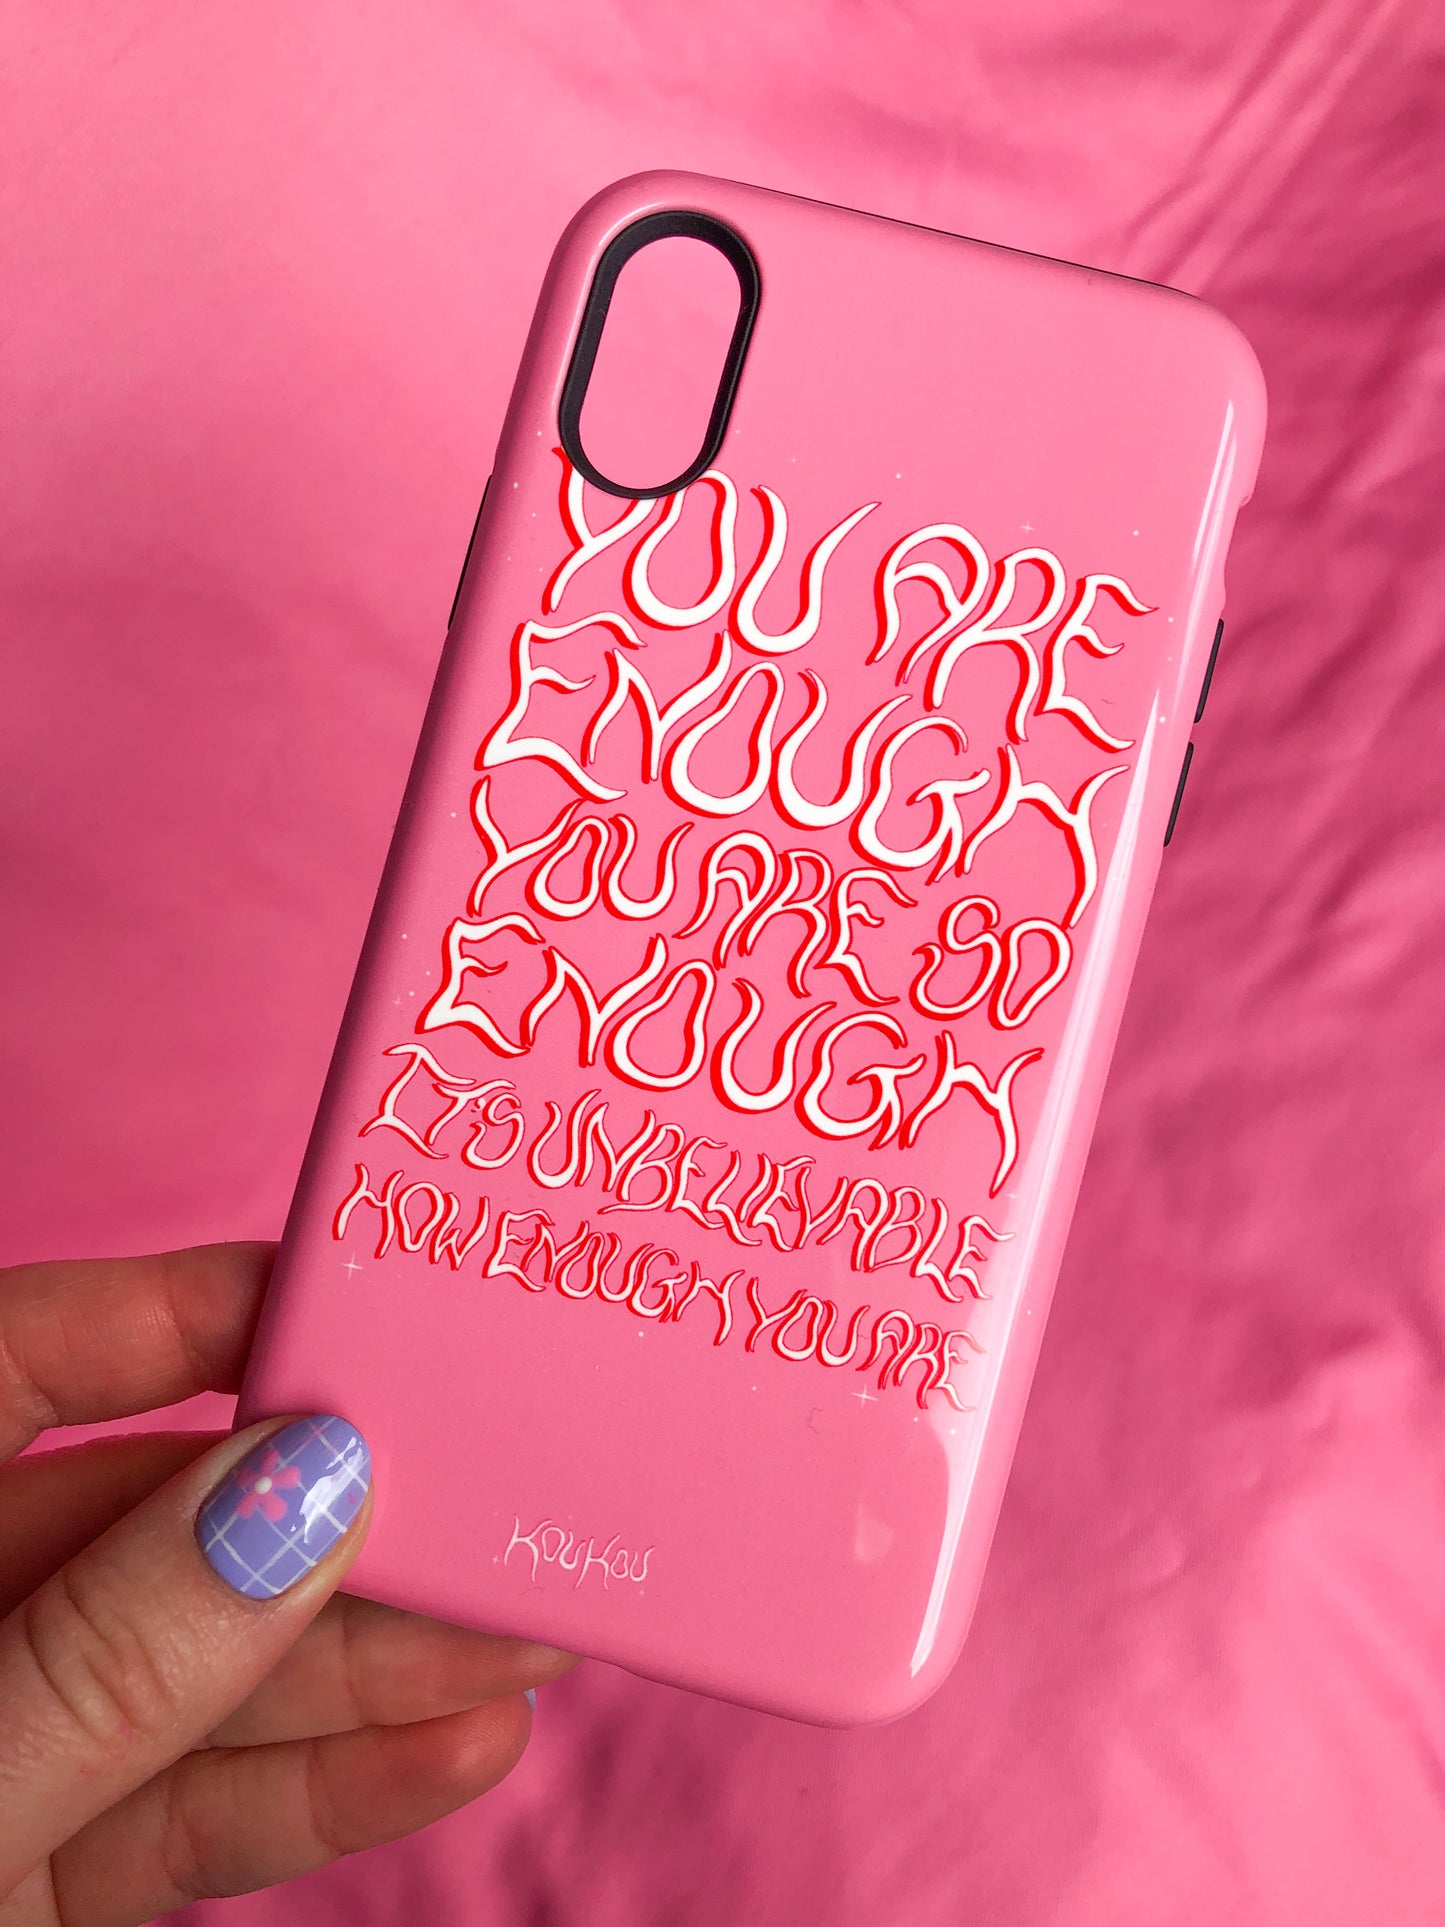 You are enough phonecase